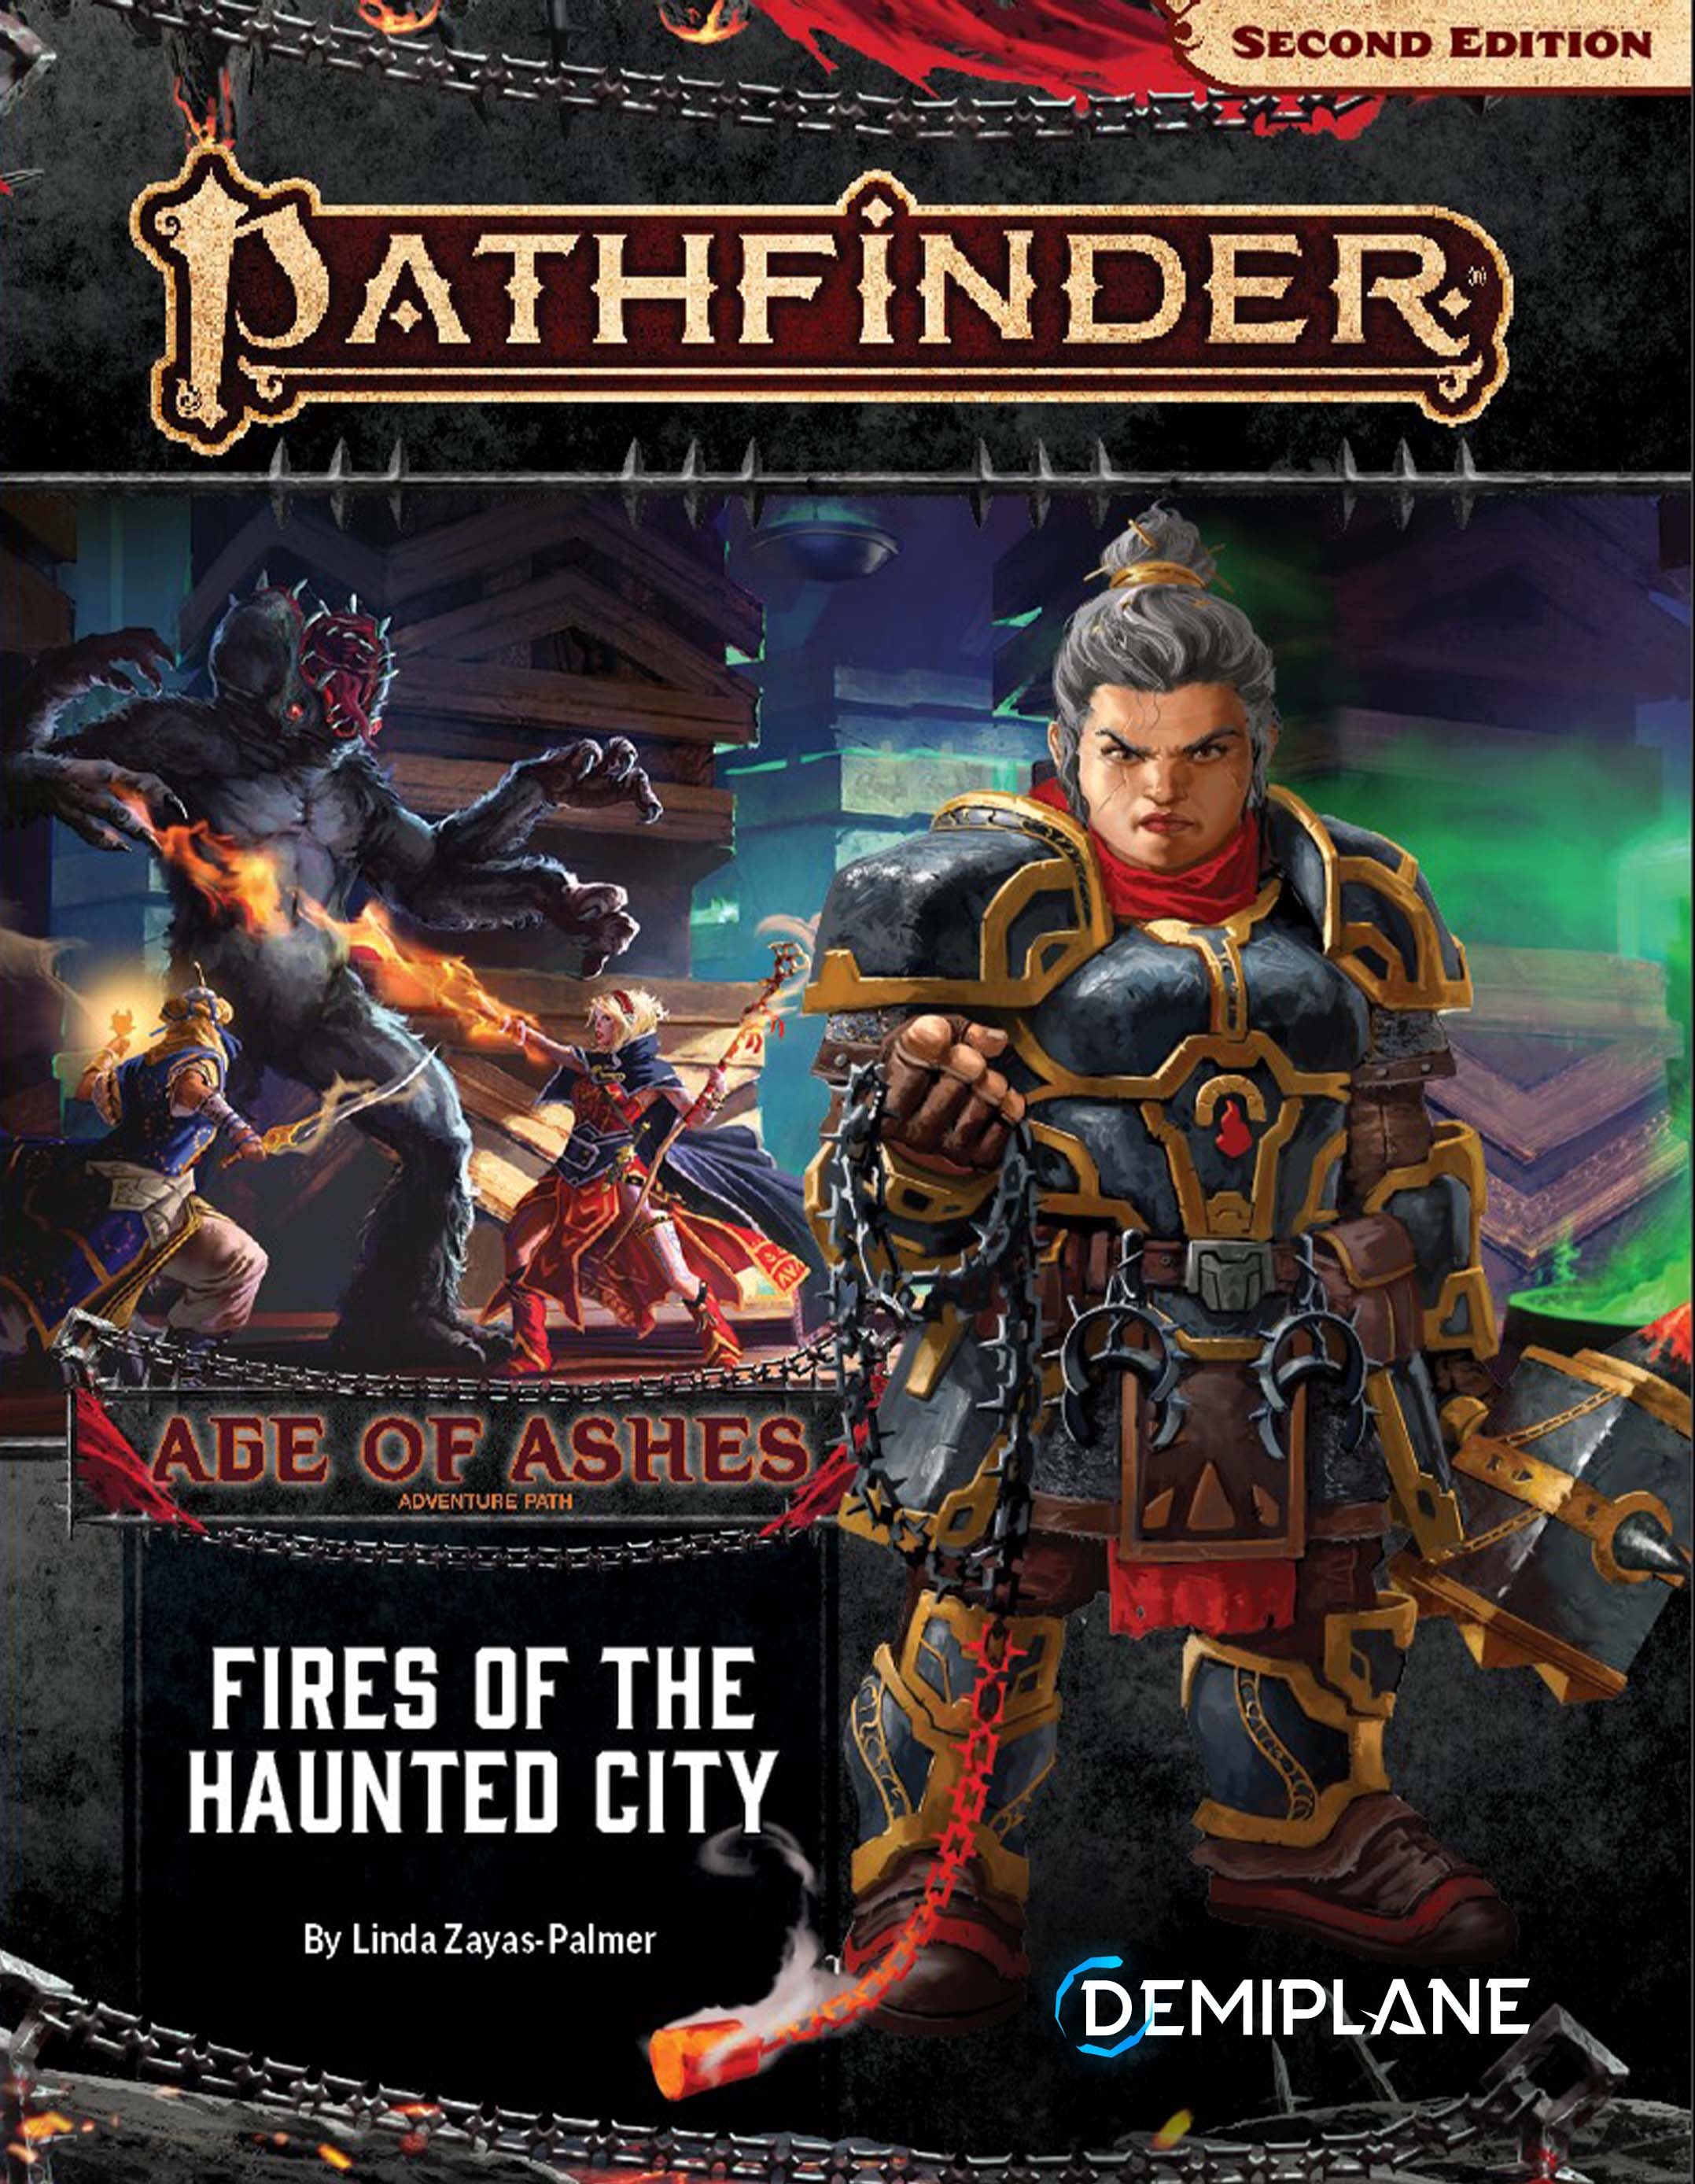 Fires of the Haunted City